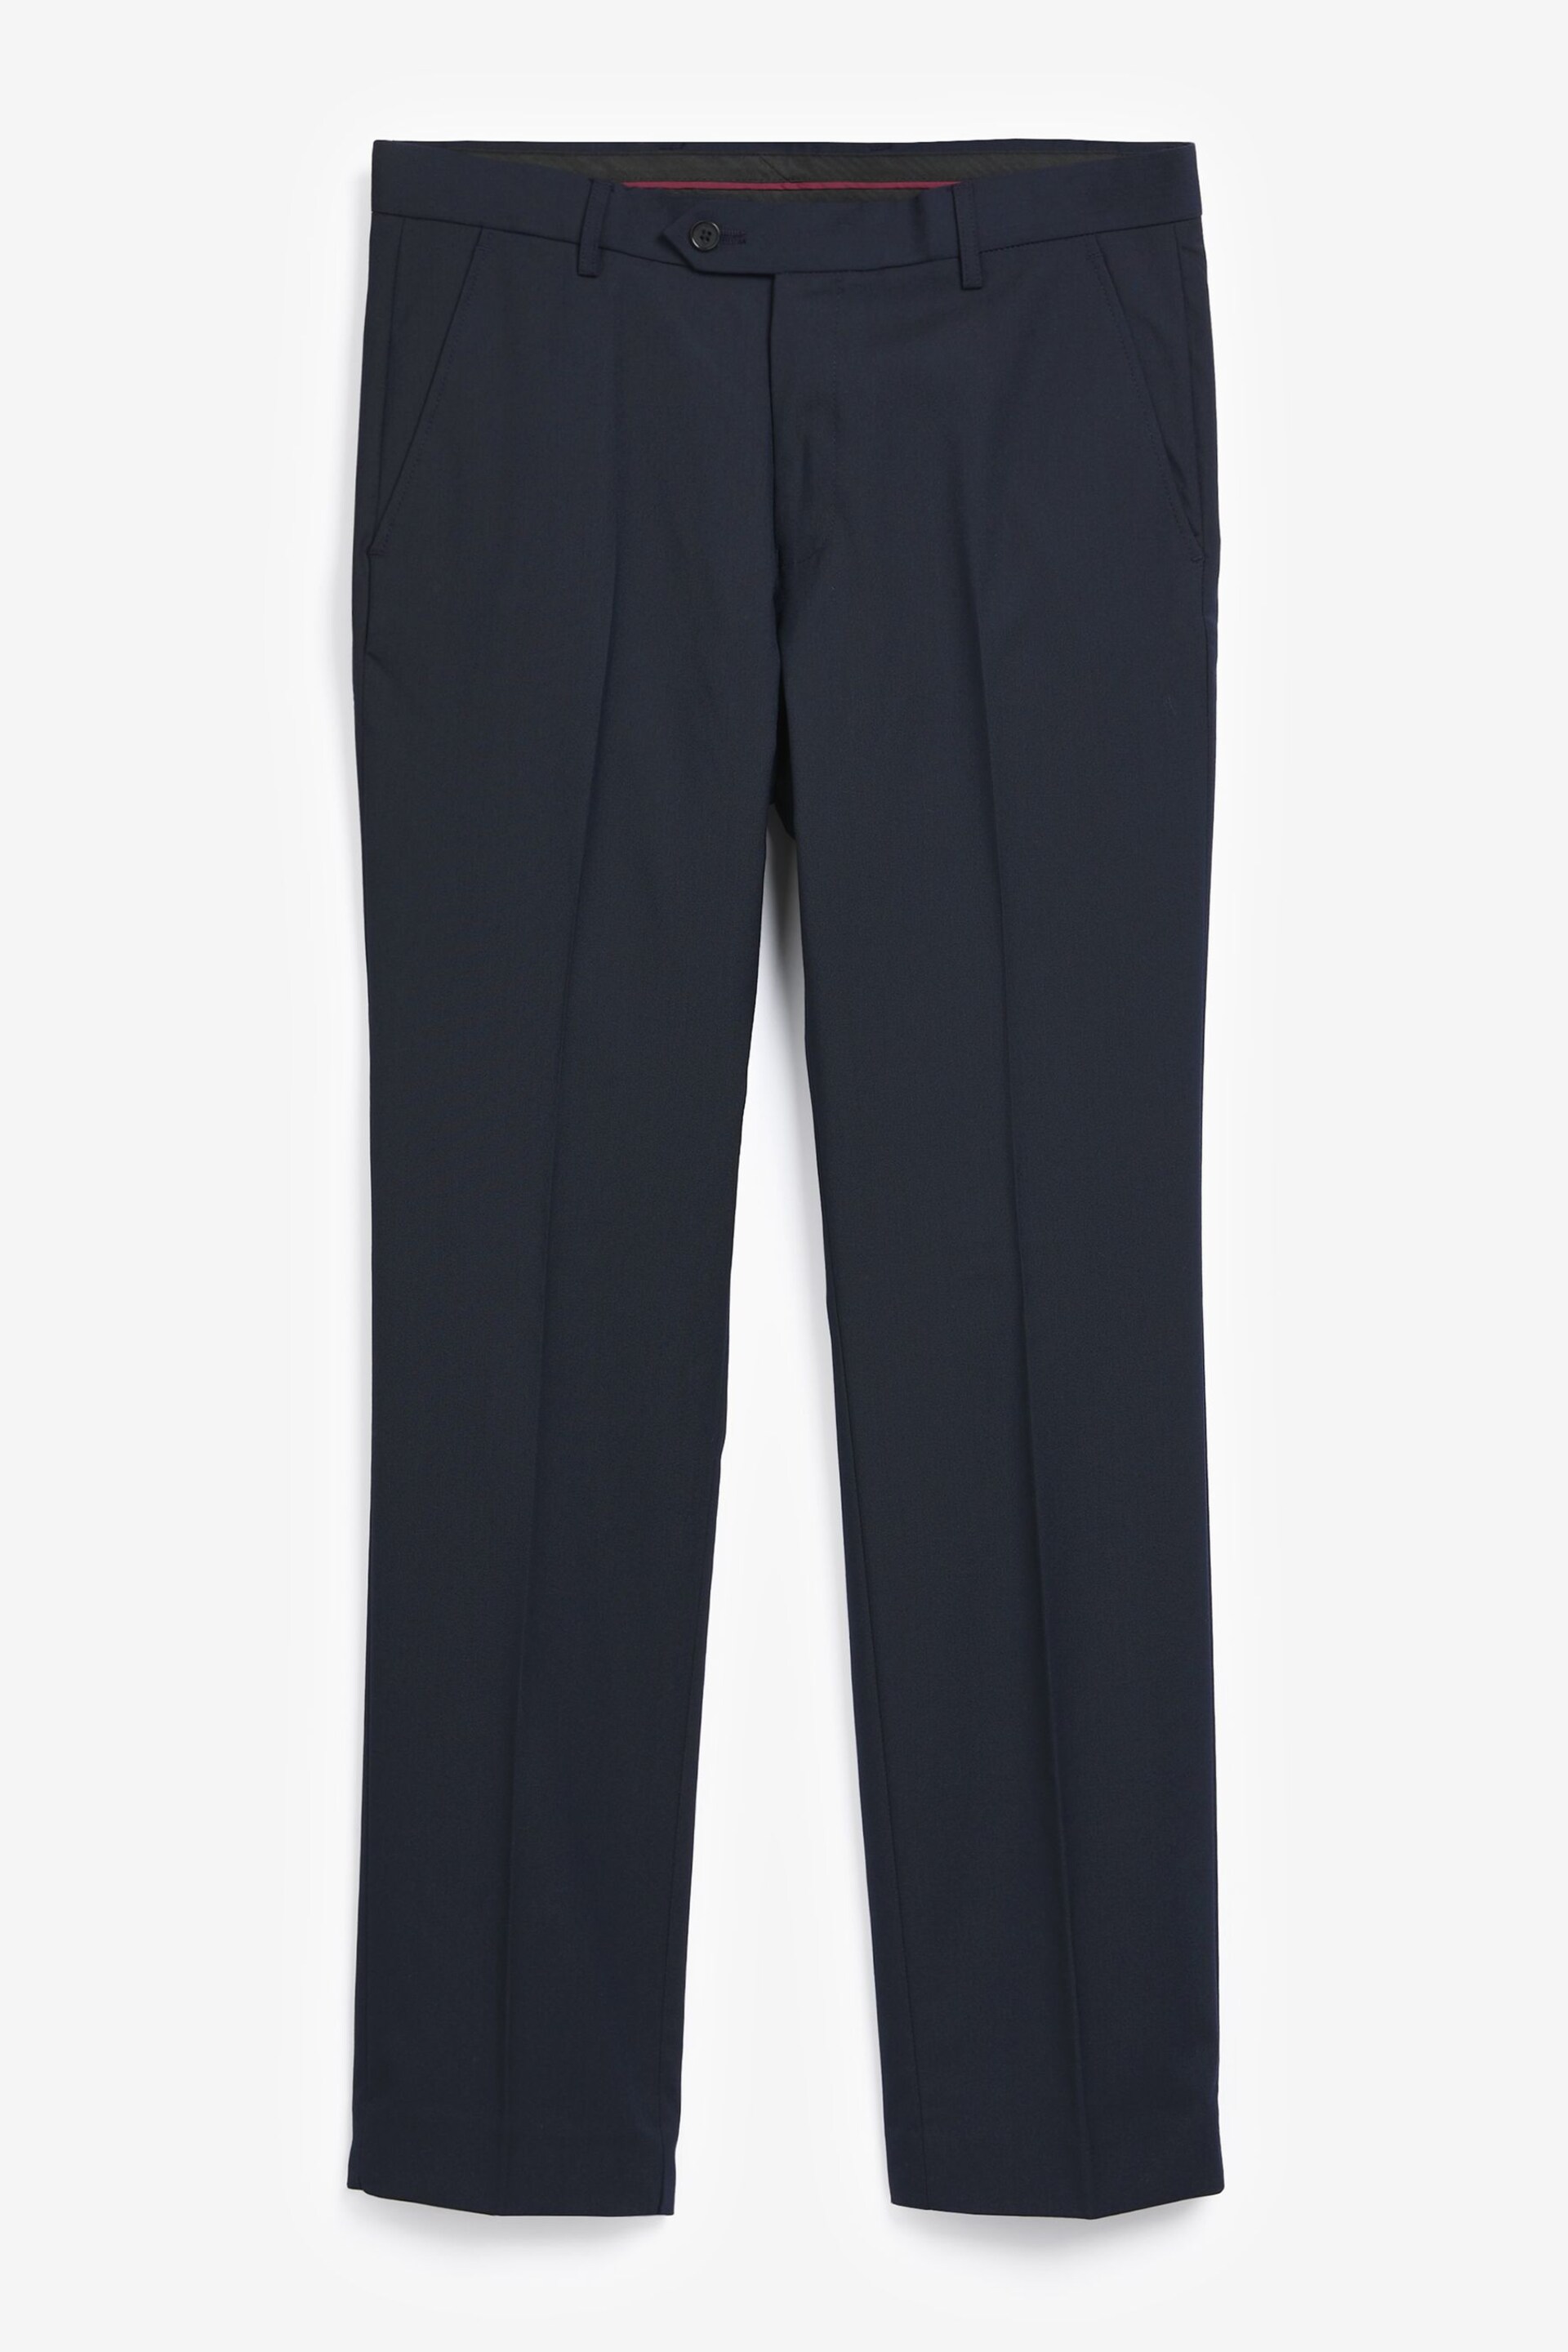 Navy Blue Tailored Stretch Smart Trousers - Image 4 of 4